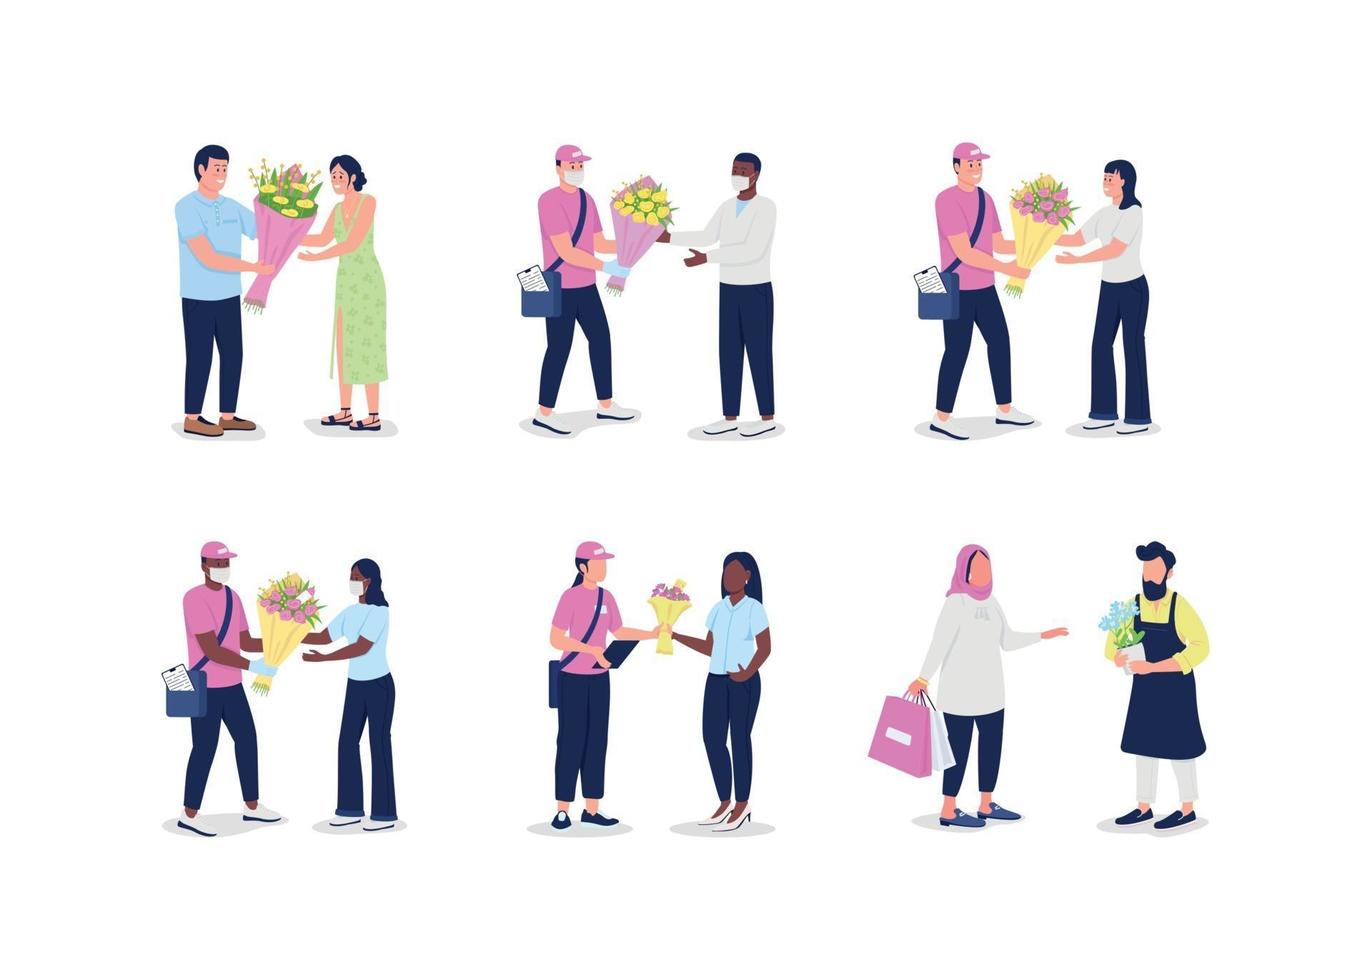 Flower delivery couriers with customers faceless character set vector